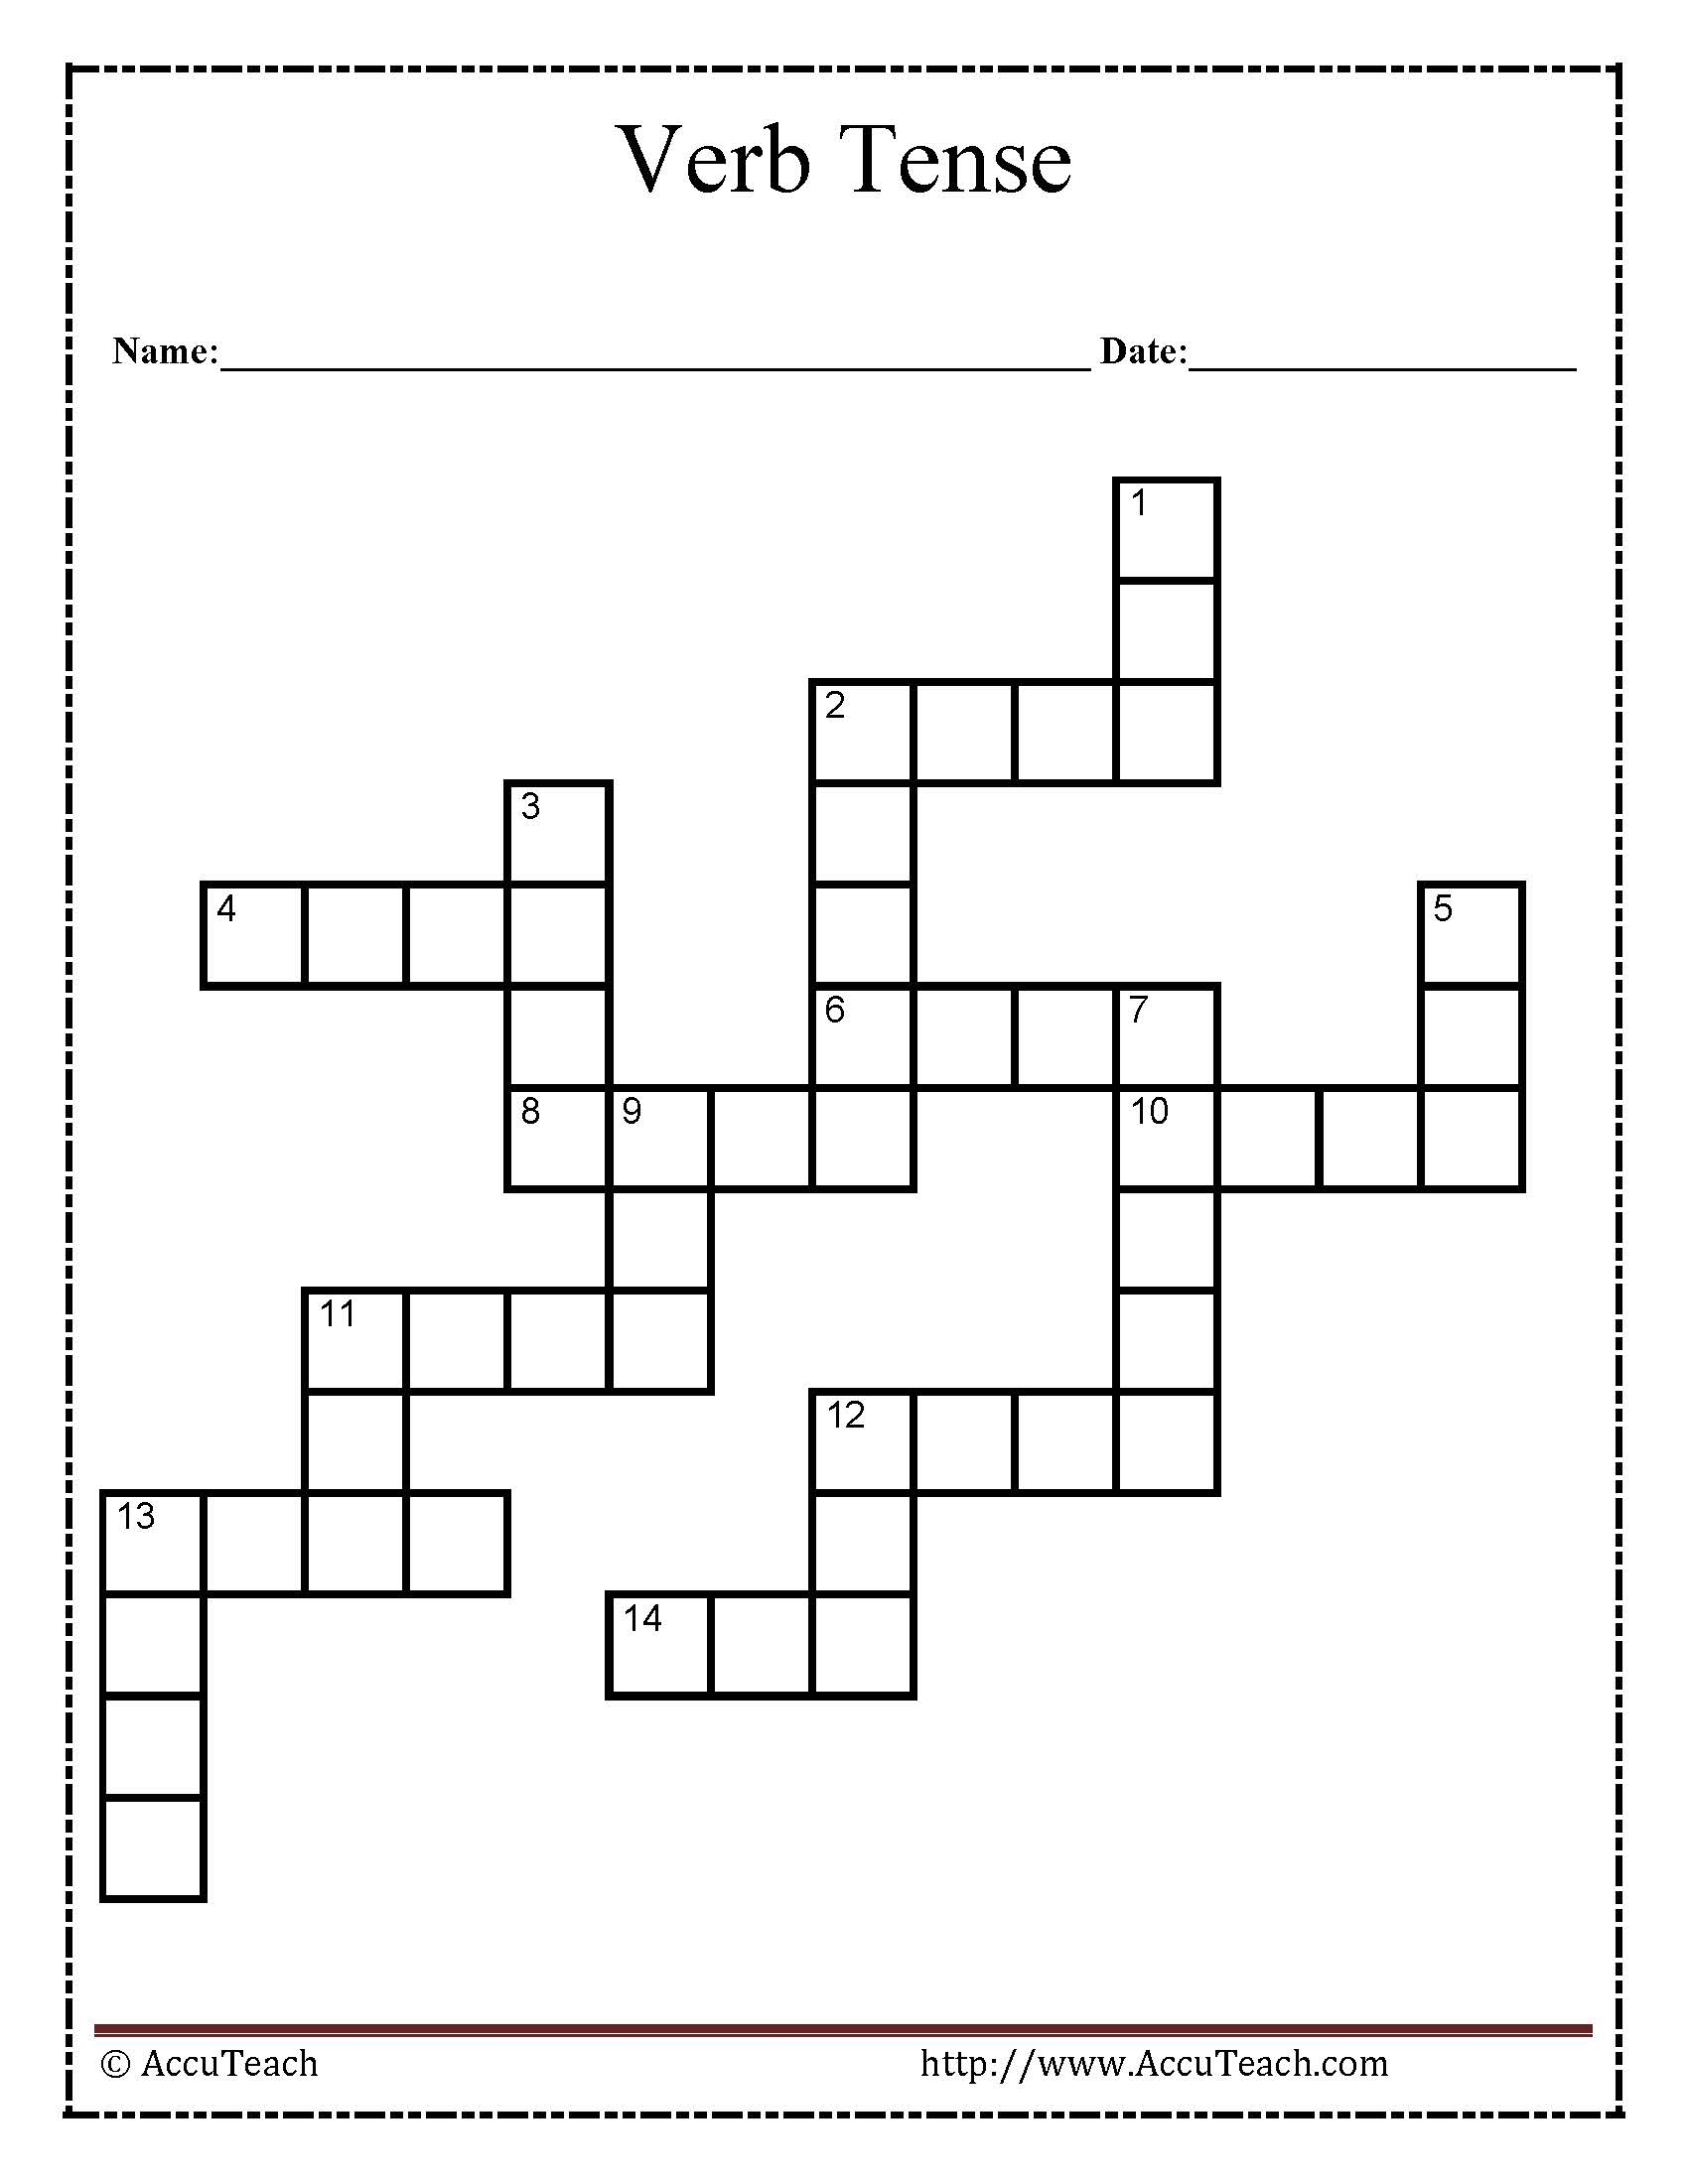 Verb Tense Crossword Puzzle Worksheet - Free Printable Crossword Puzzles For 6Th Grade